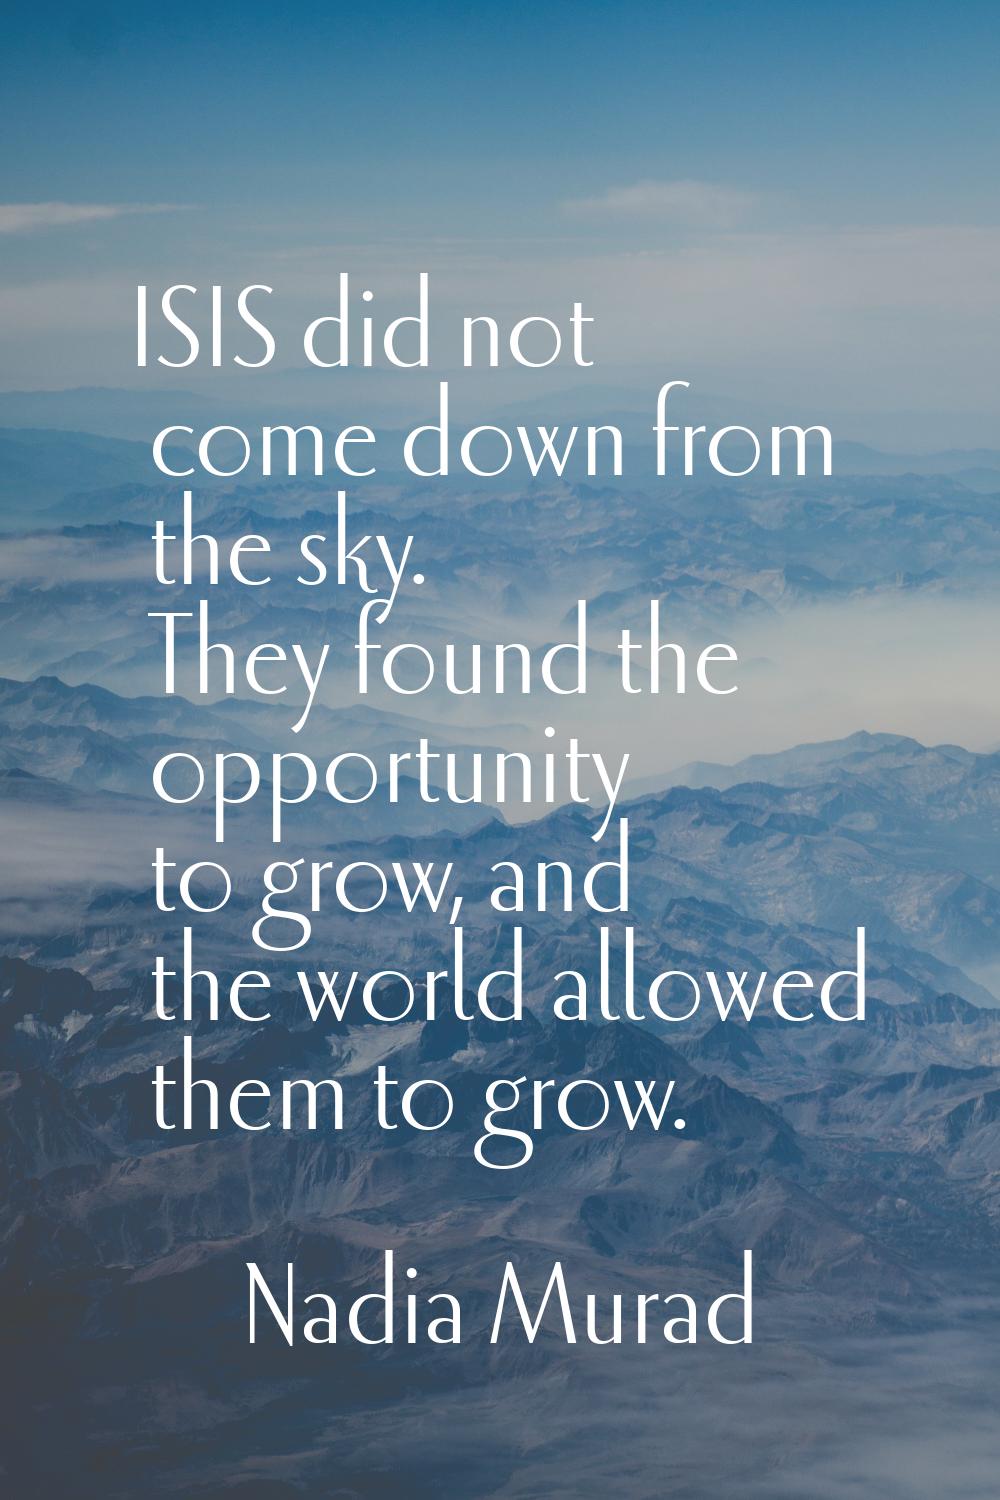 ISIS did not come down from the sky. They found the opportunity to grow, and the world allowed them